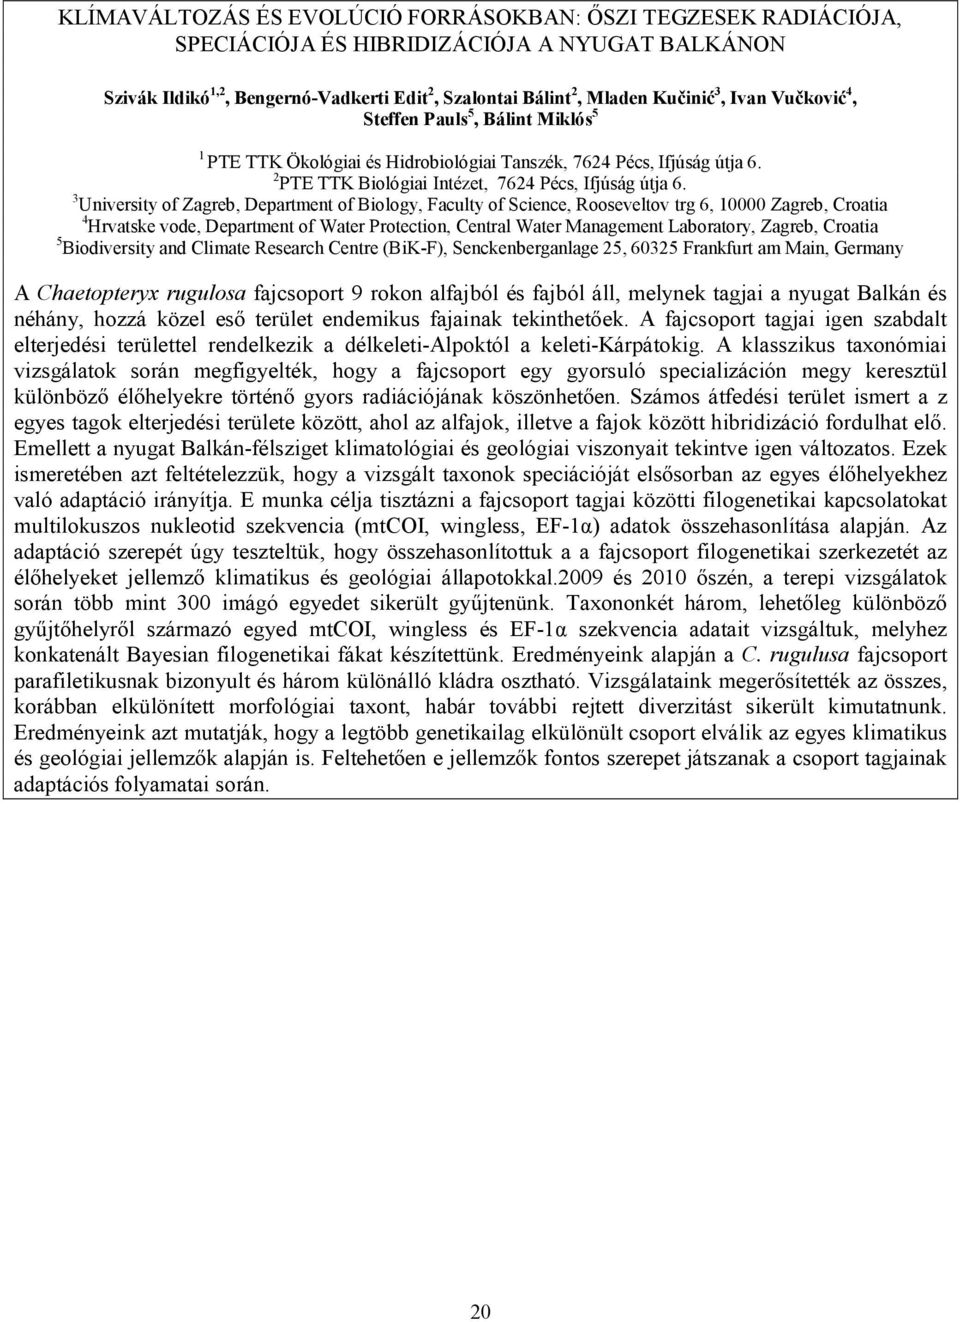 3 University of Zagreb, Department of Biology, Faculty of Science, Rooseveltov trg 6, 10000 Zagreb, Croatia 4 Hrvatske vode, Department of Water Protection, Central Water Management Laboratory,